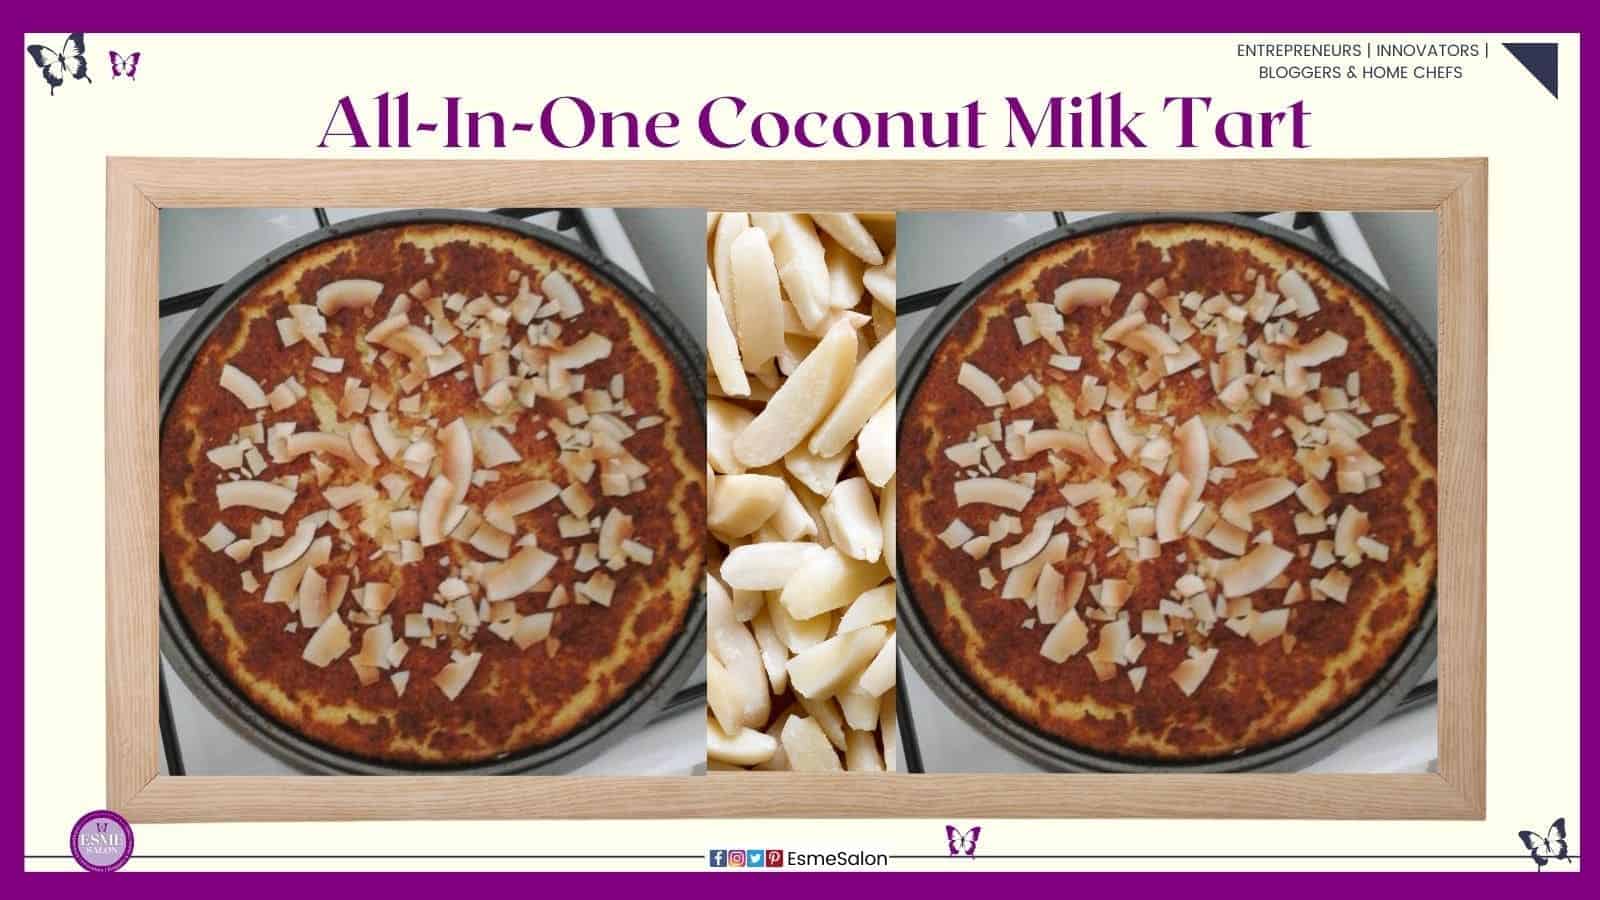 an image of a All-In-One Coconut Milk Tart with slivered almonds